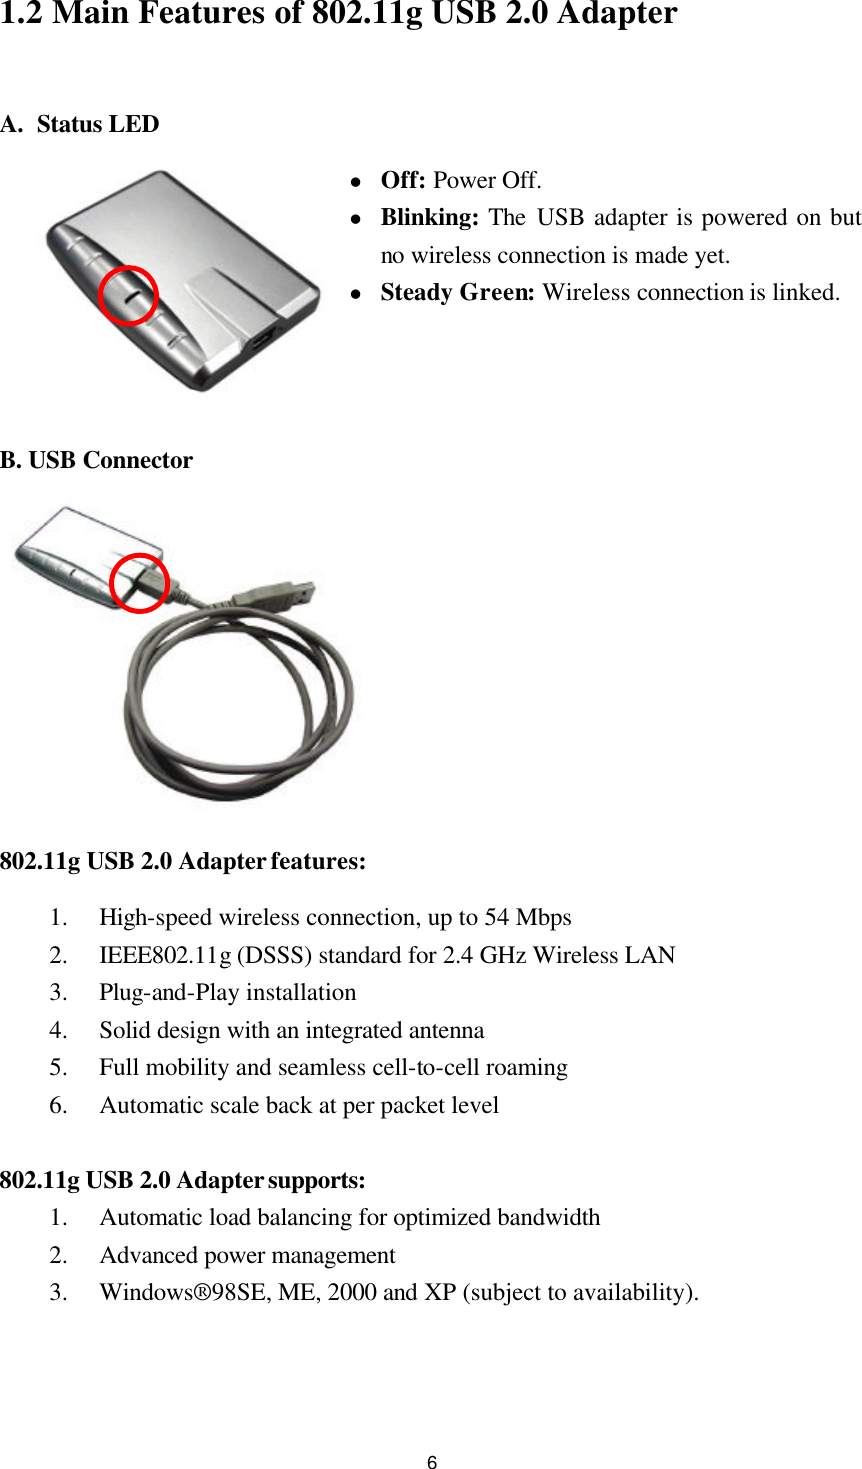  61.2 Main Features of 802.11g USB 2.0 Adapter  A. Status LED l Off: Power Off. l Blinking: The USB adapter is powered on but no wireless connection is made yet. l Steady Green: Wireless connection is linked.    B. USB Connector  802.11g USB 2.0 Adapter features: 1.  High-speed wireless connection, up to 54 Mbps 2.  IEEE802.11g (DSSS) standard for 2.4 GHz Wireless LAN 3.  Plug-and-Play installation 4.  Solid design with an integrated antenna 5.  Full mobility and seamless cell-to-cell roaming 6.  Automatic scale back at per packet level  802.11g USB 2.0 Adapter supports: 1.  Automatic load balancing for optimized bandwidth 2.  Advanced power management 3.  Windows®98SE, ME, 2000 and XP (subject to availability).   